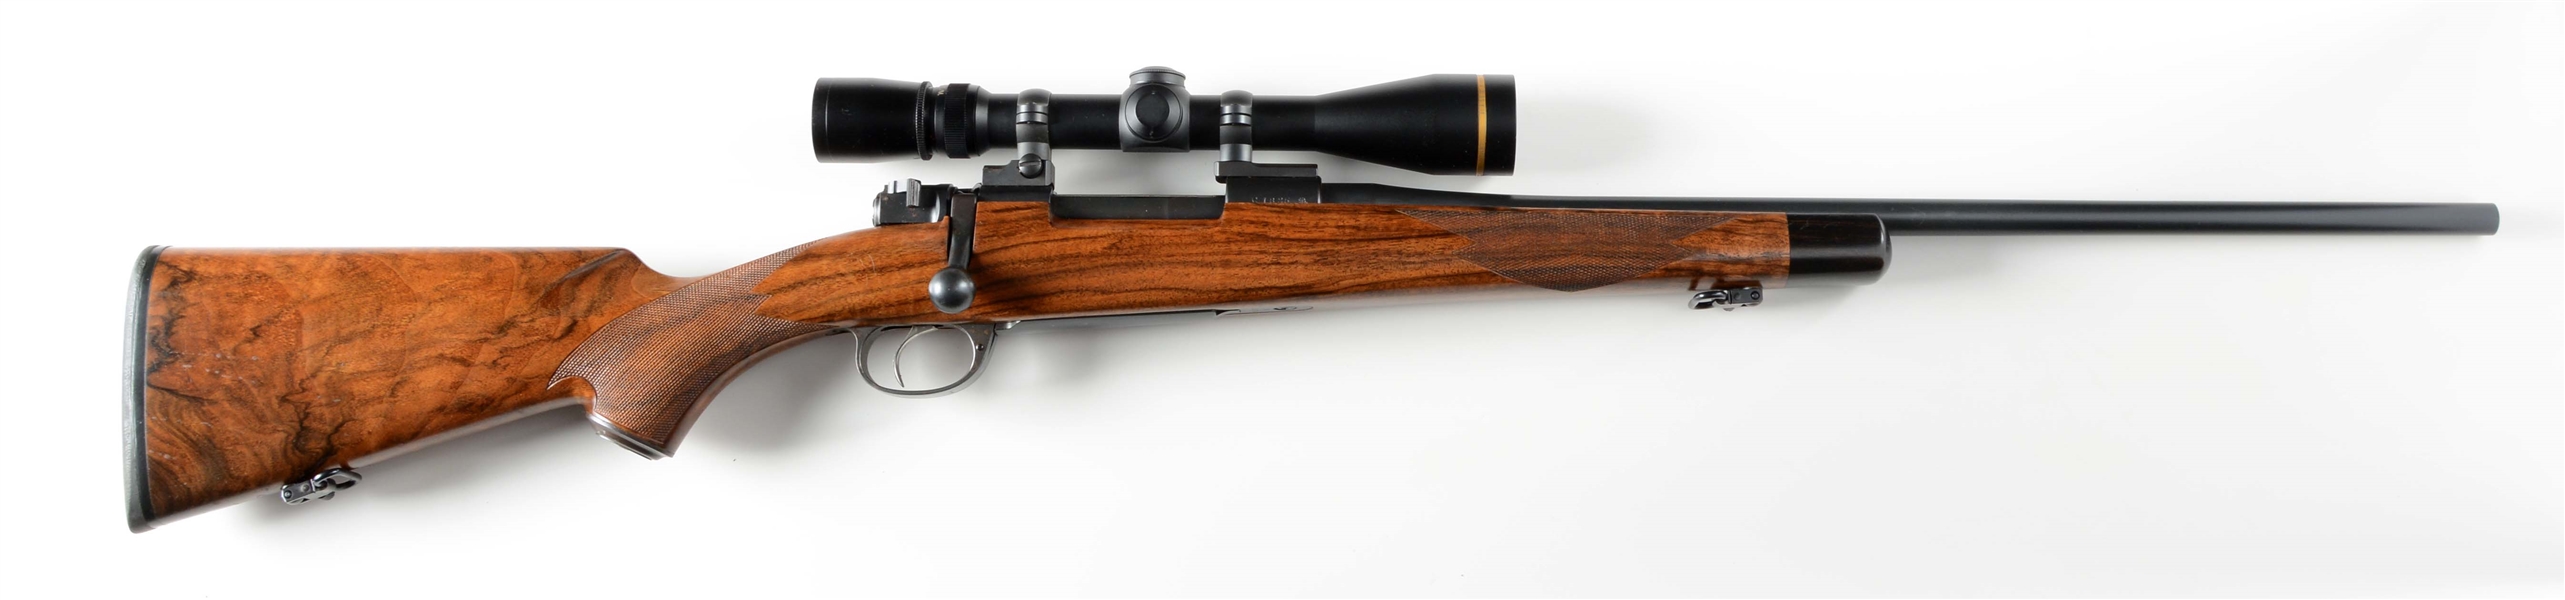 (C) C.L. MOORE MAUSER ARGENTINE CUSTOM BOLT ACTION SPORTING RIFLE.